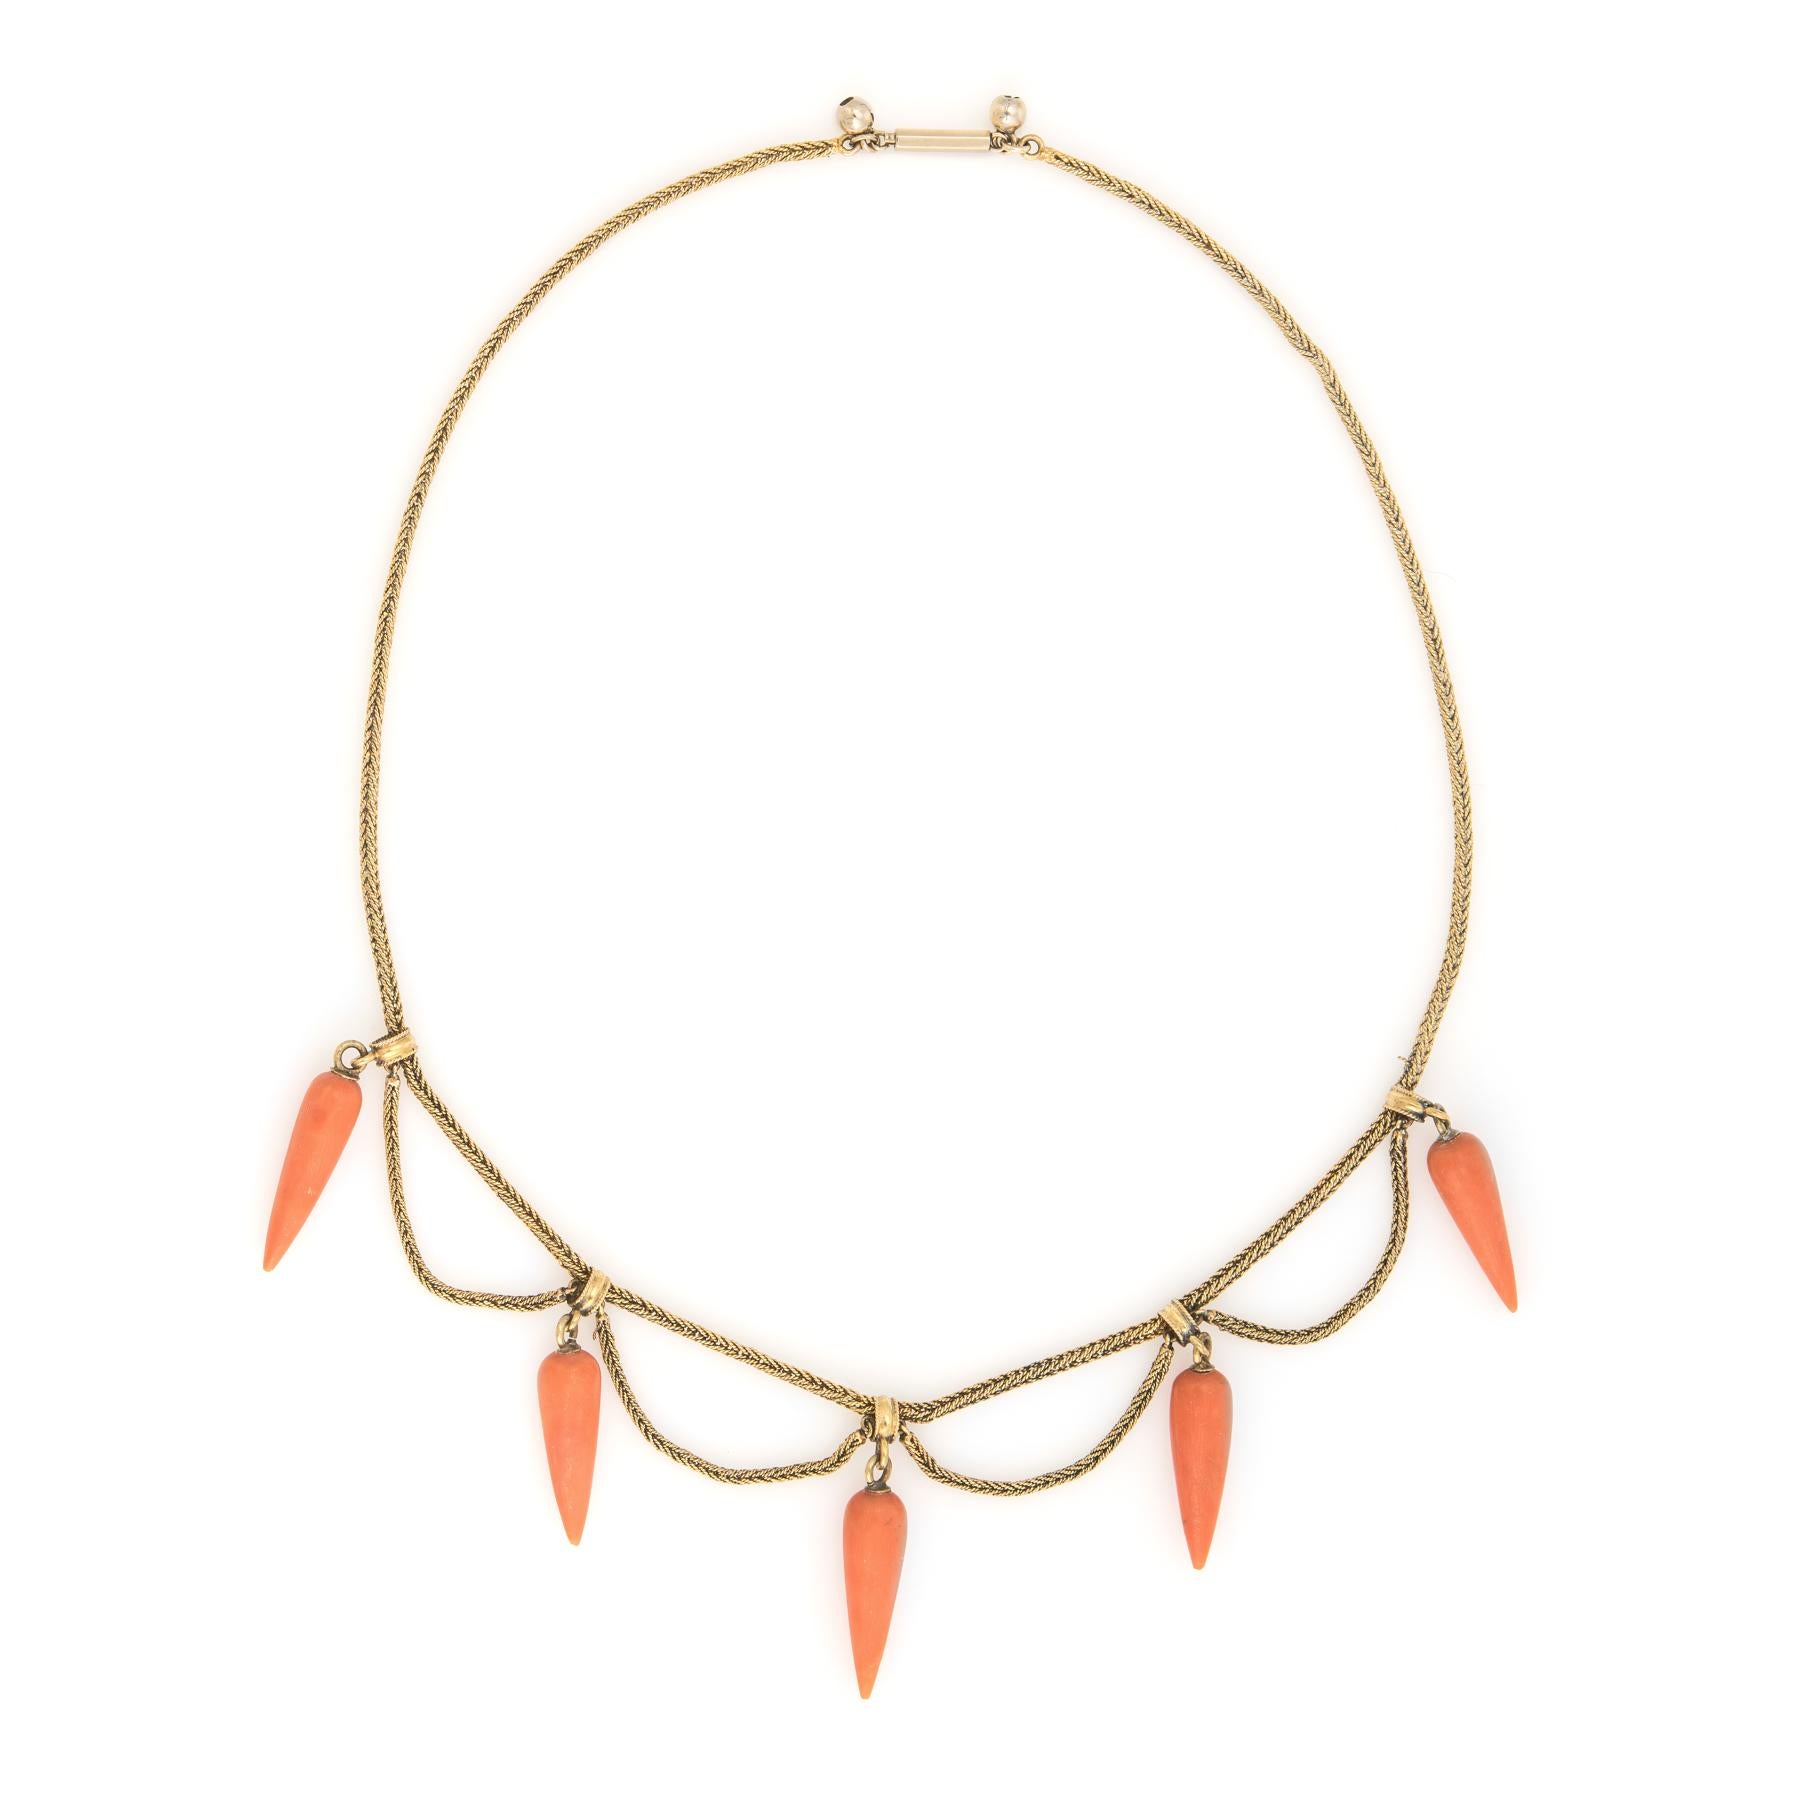 Finely detailed antique Victorian necklace (circa 1880s to 1900s), crafted in 14 karat yellow gold.  

The 5 natural coral drops each measure 21mm x 6.5mm. The coral is a salmon-orange hue. The drops are in excellent condition and free of cracks or